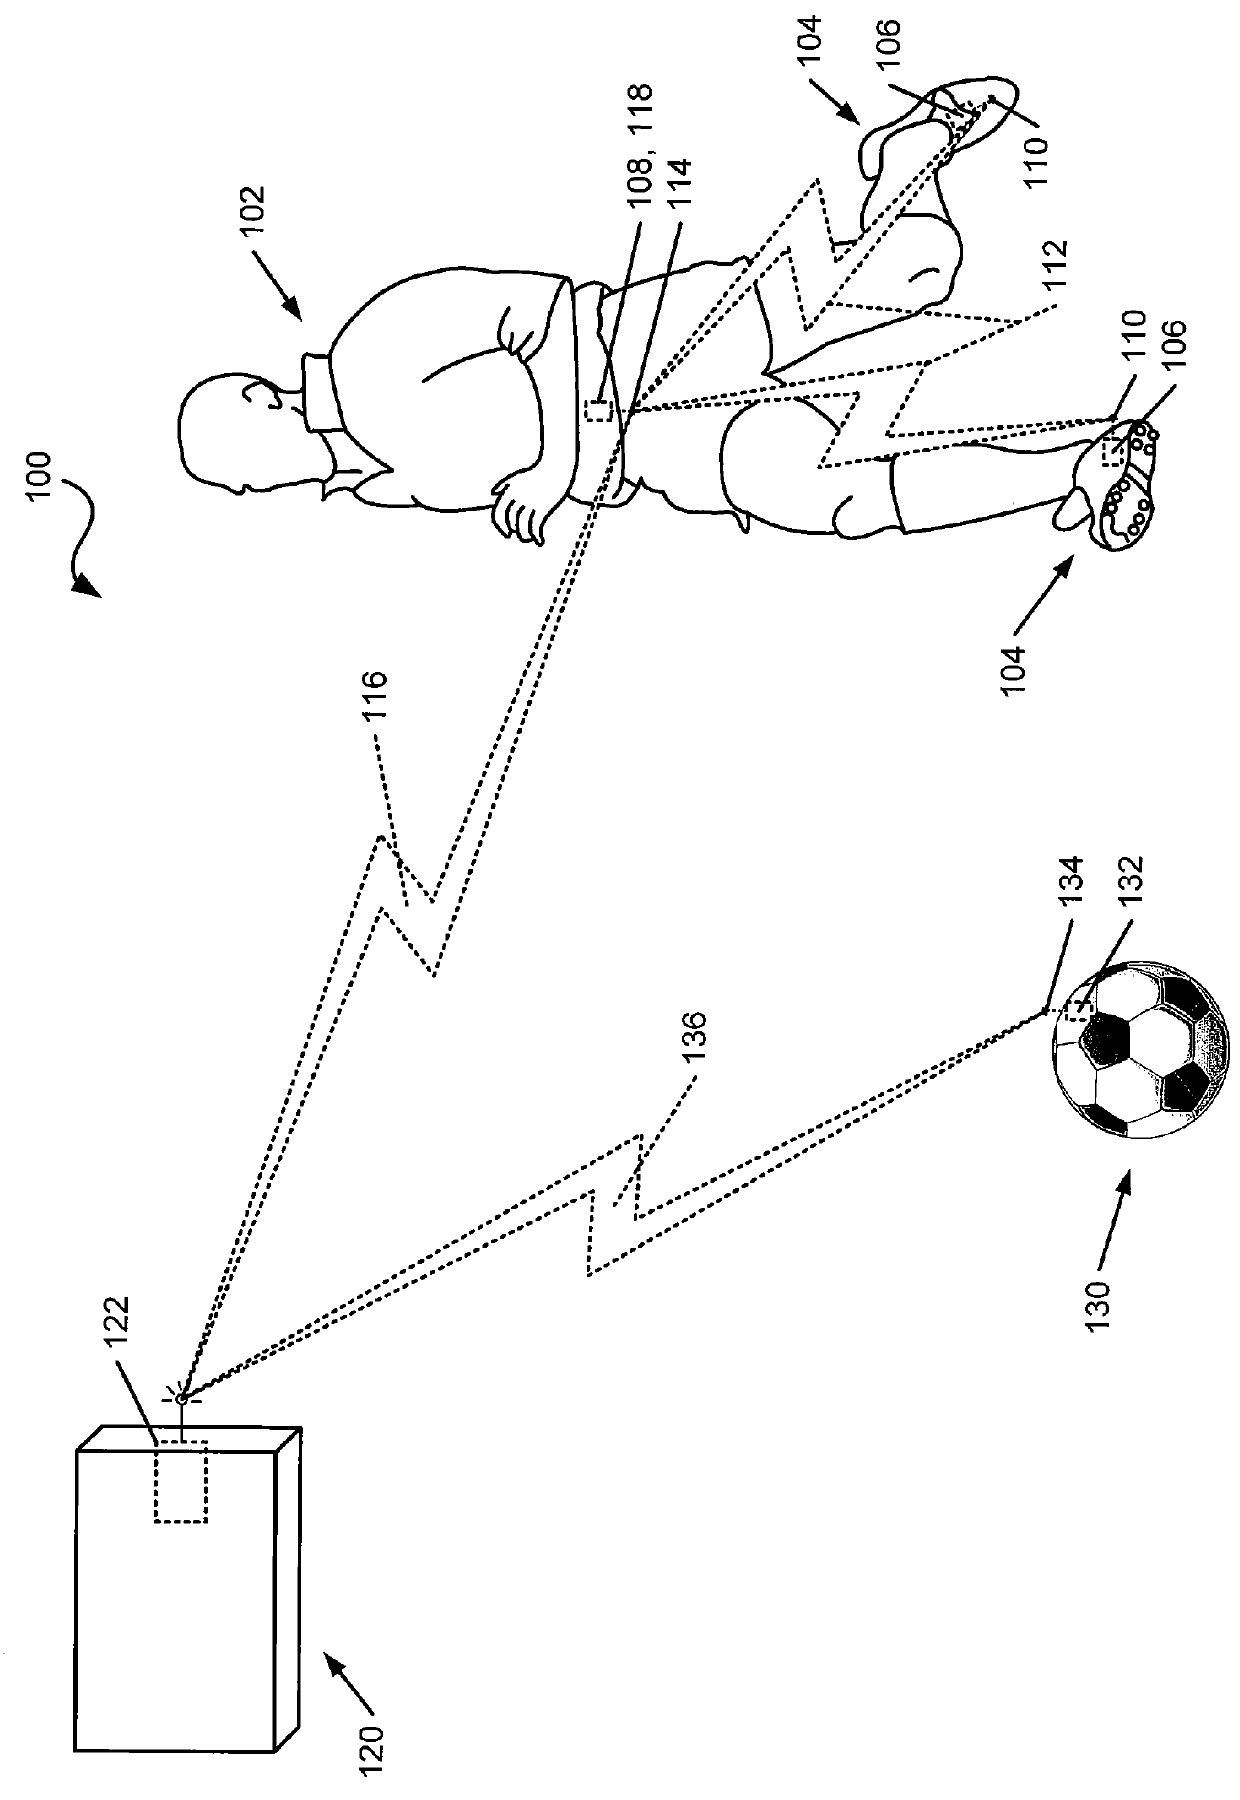 Athletic performance monitoring systems and methods in a team sports environment